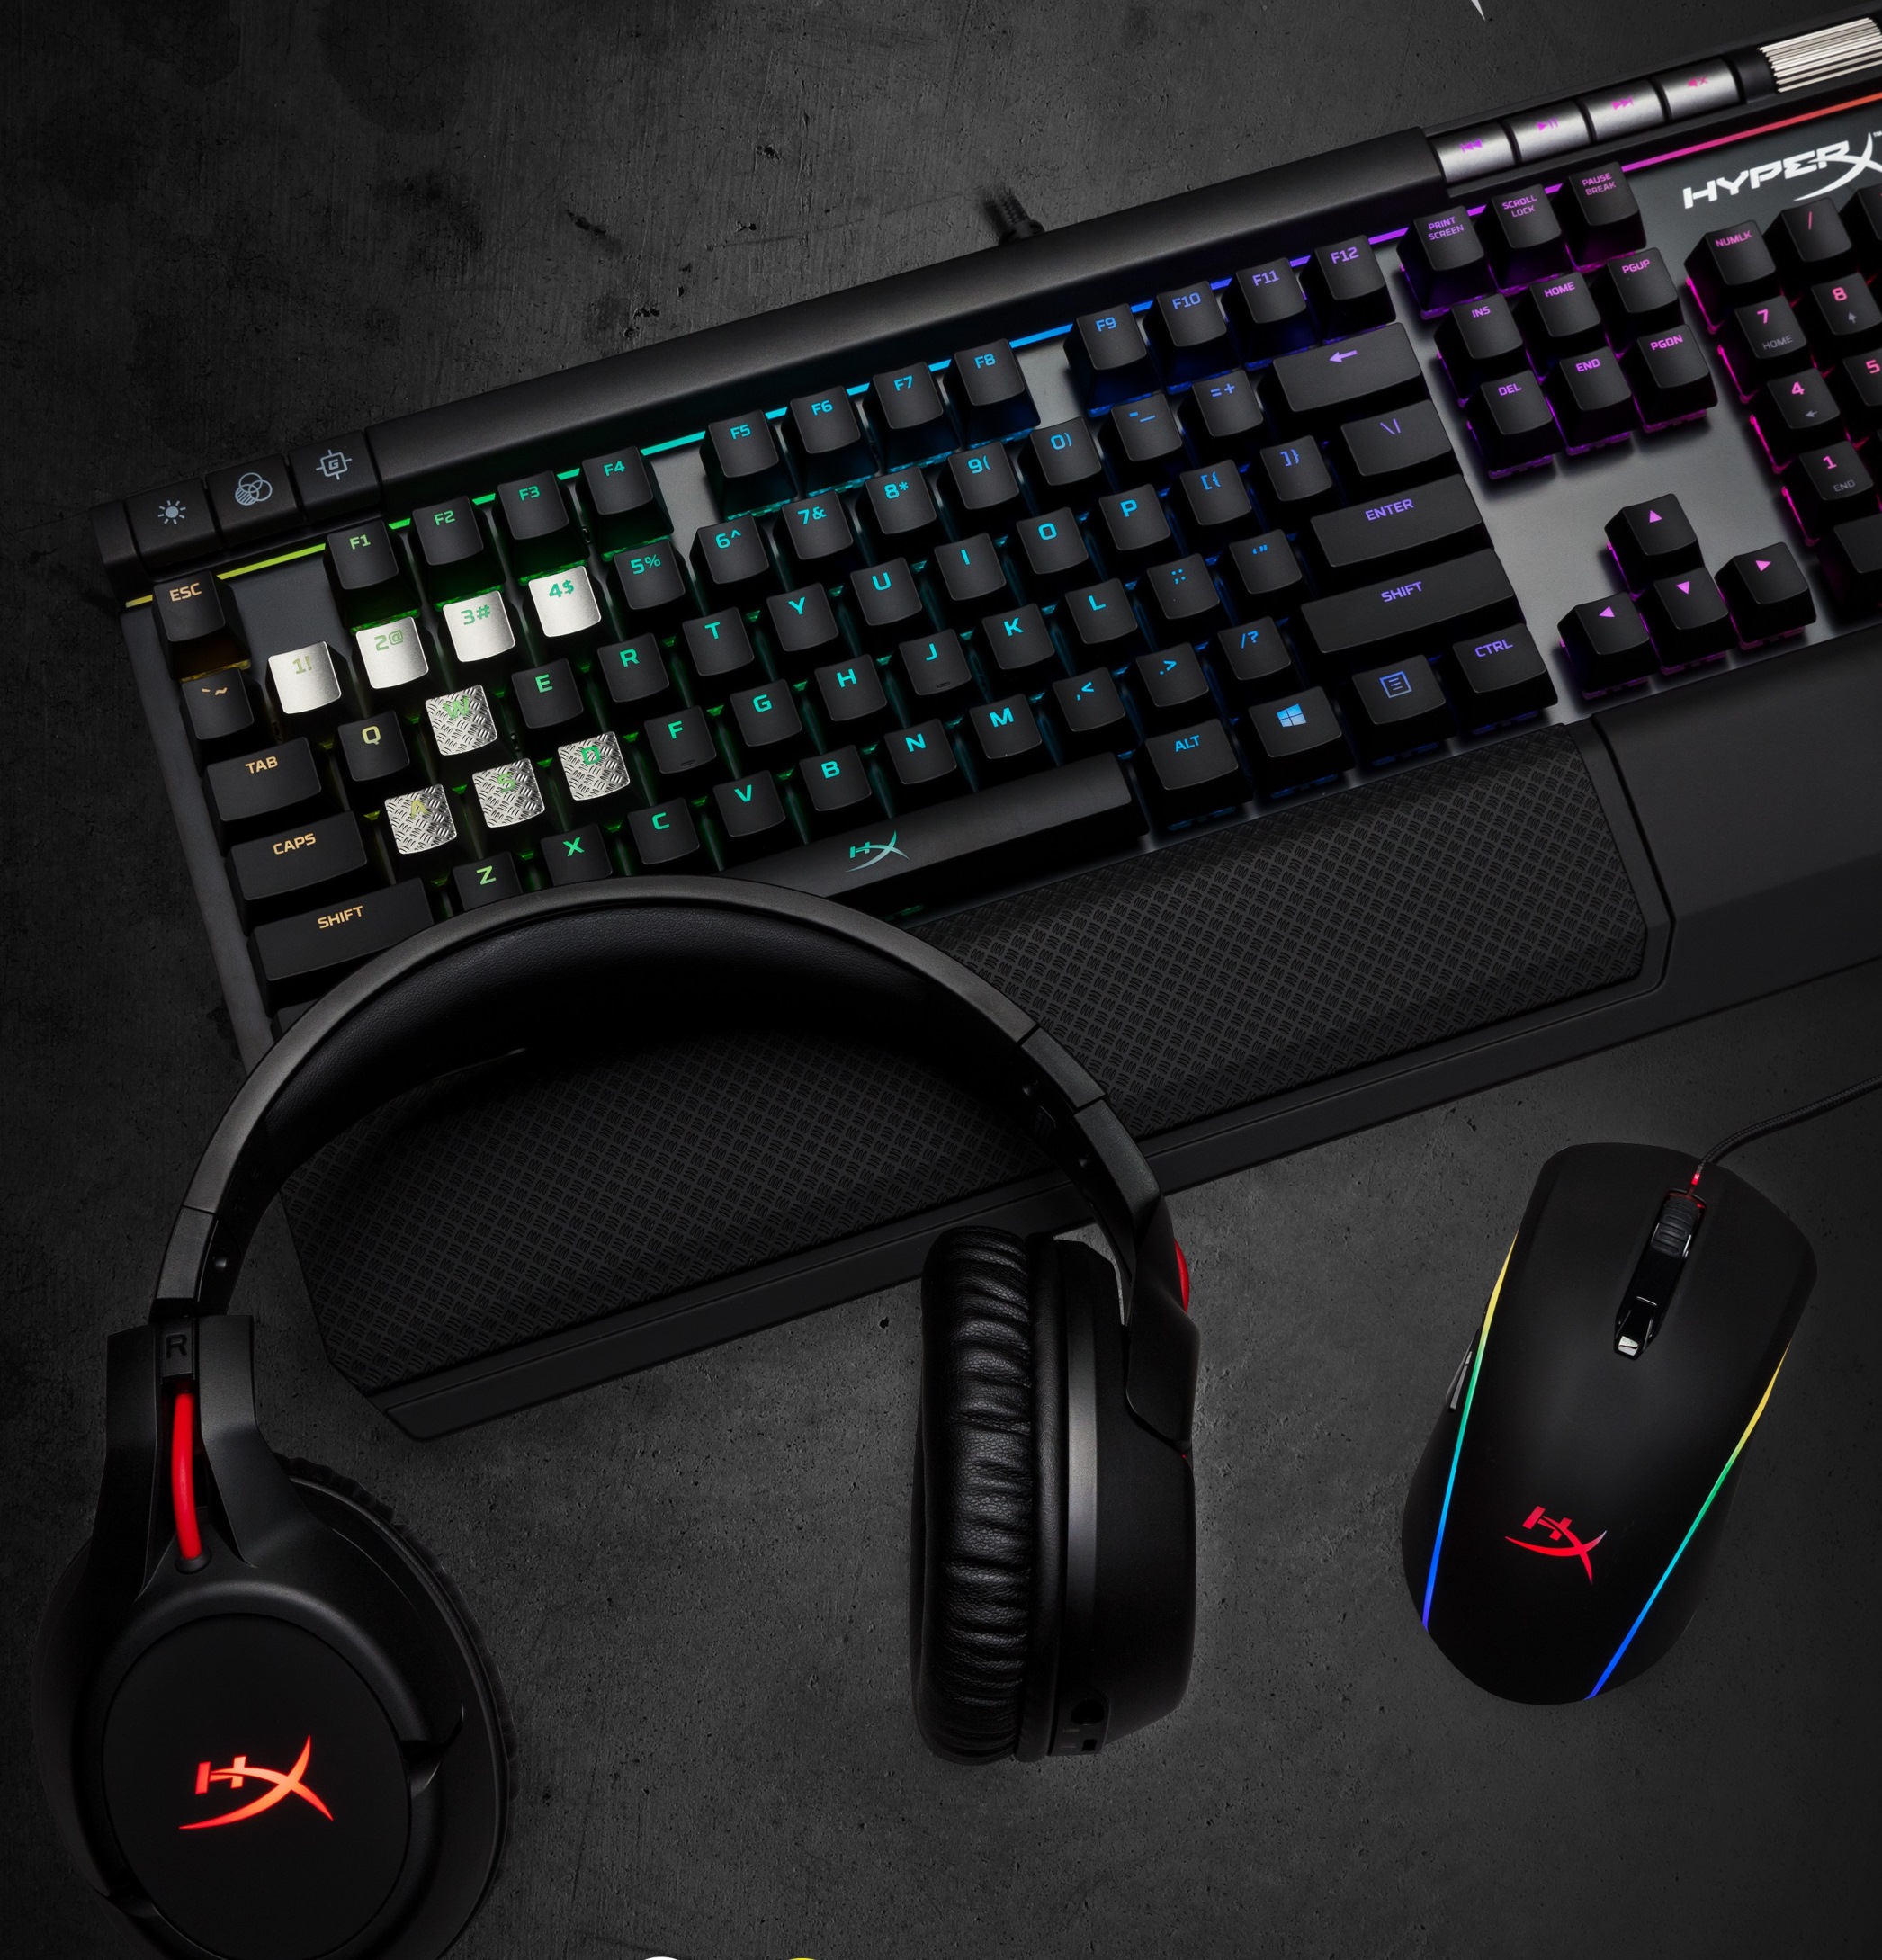 HyperX Unveils Newest RGB Gaming Gear at CES 2018